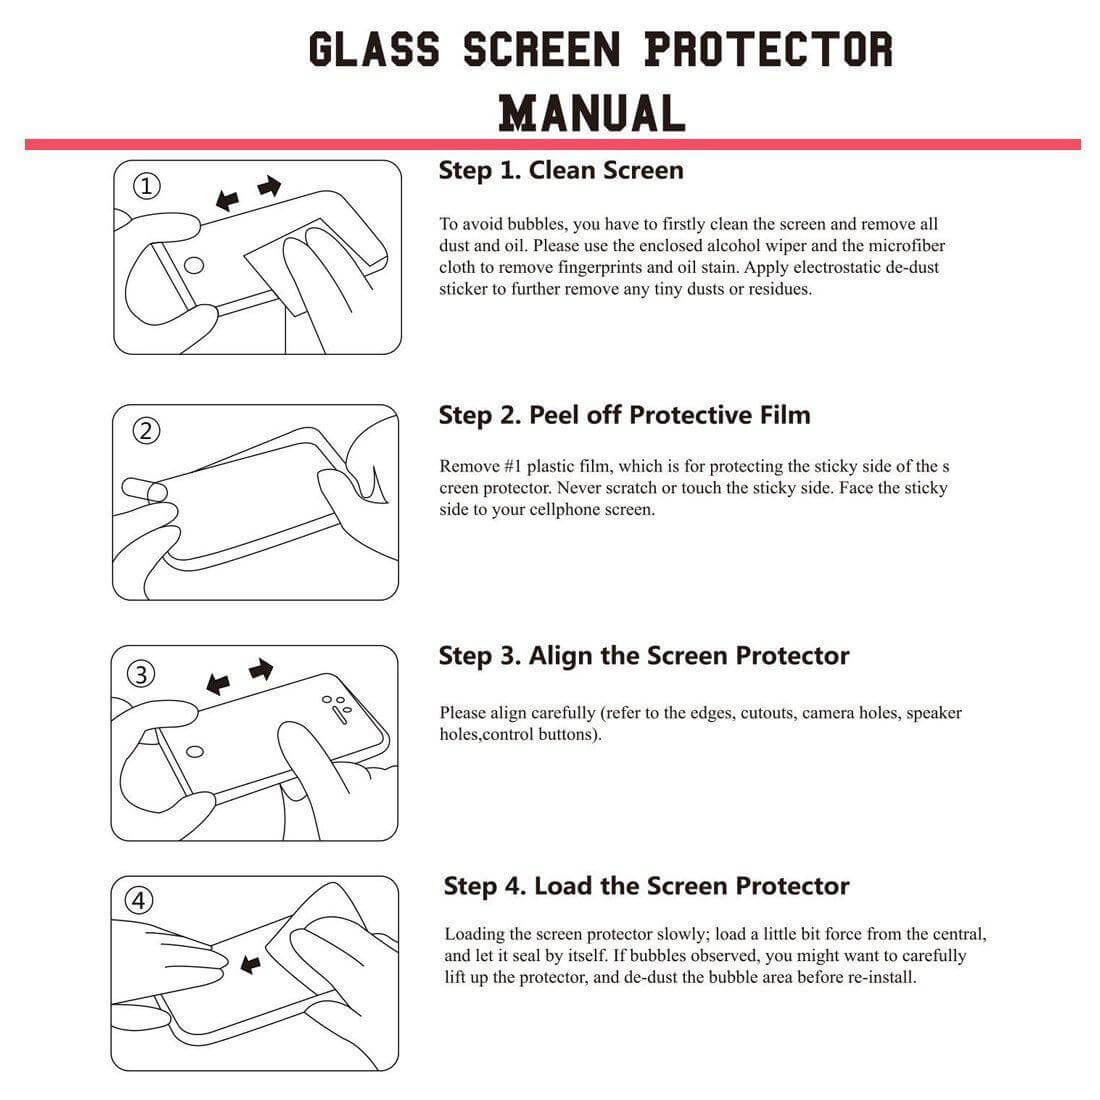 For Sony Xperia 1 Tempered Glass / Screen Protector